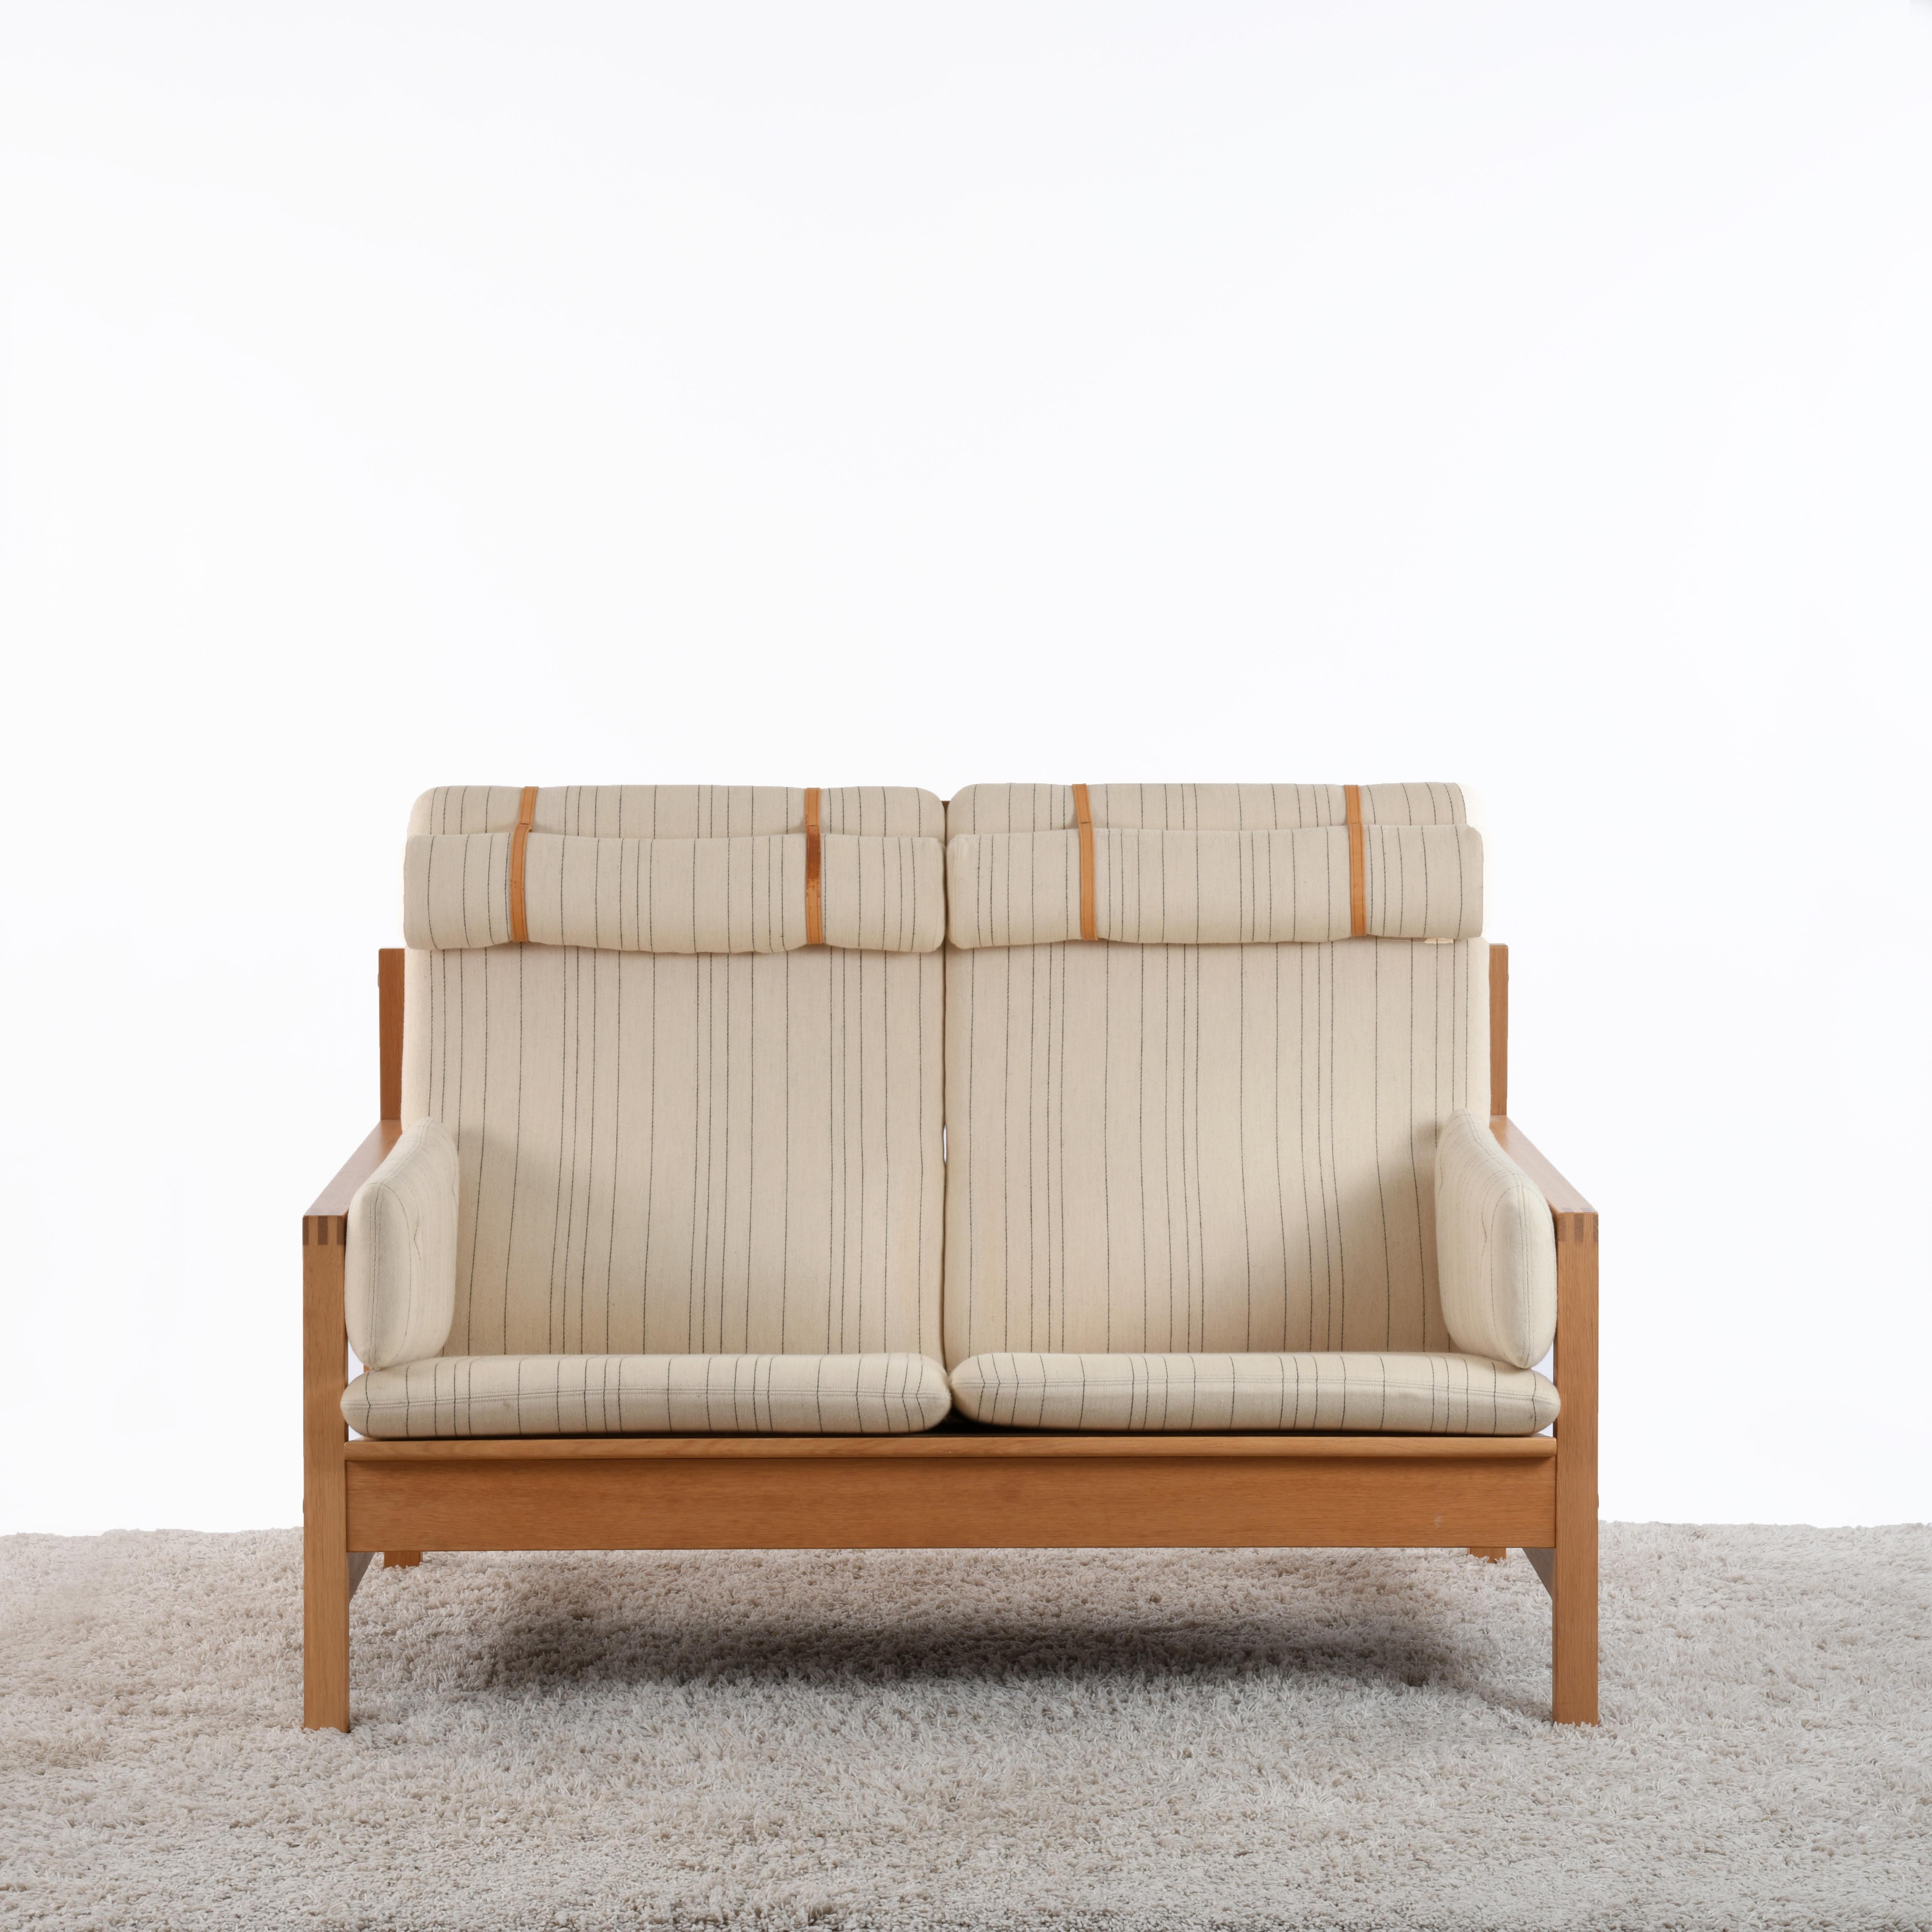 Two seater sofa in solid oak and wool, model 2252, designed by Børge Mogensen (1914-1972) in 1956. Published by Fredericia Stolefabrik in Denmark in the 70s. Foams are in perfect condition, as well as the textiles, probably original. The headrests